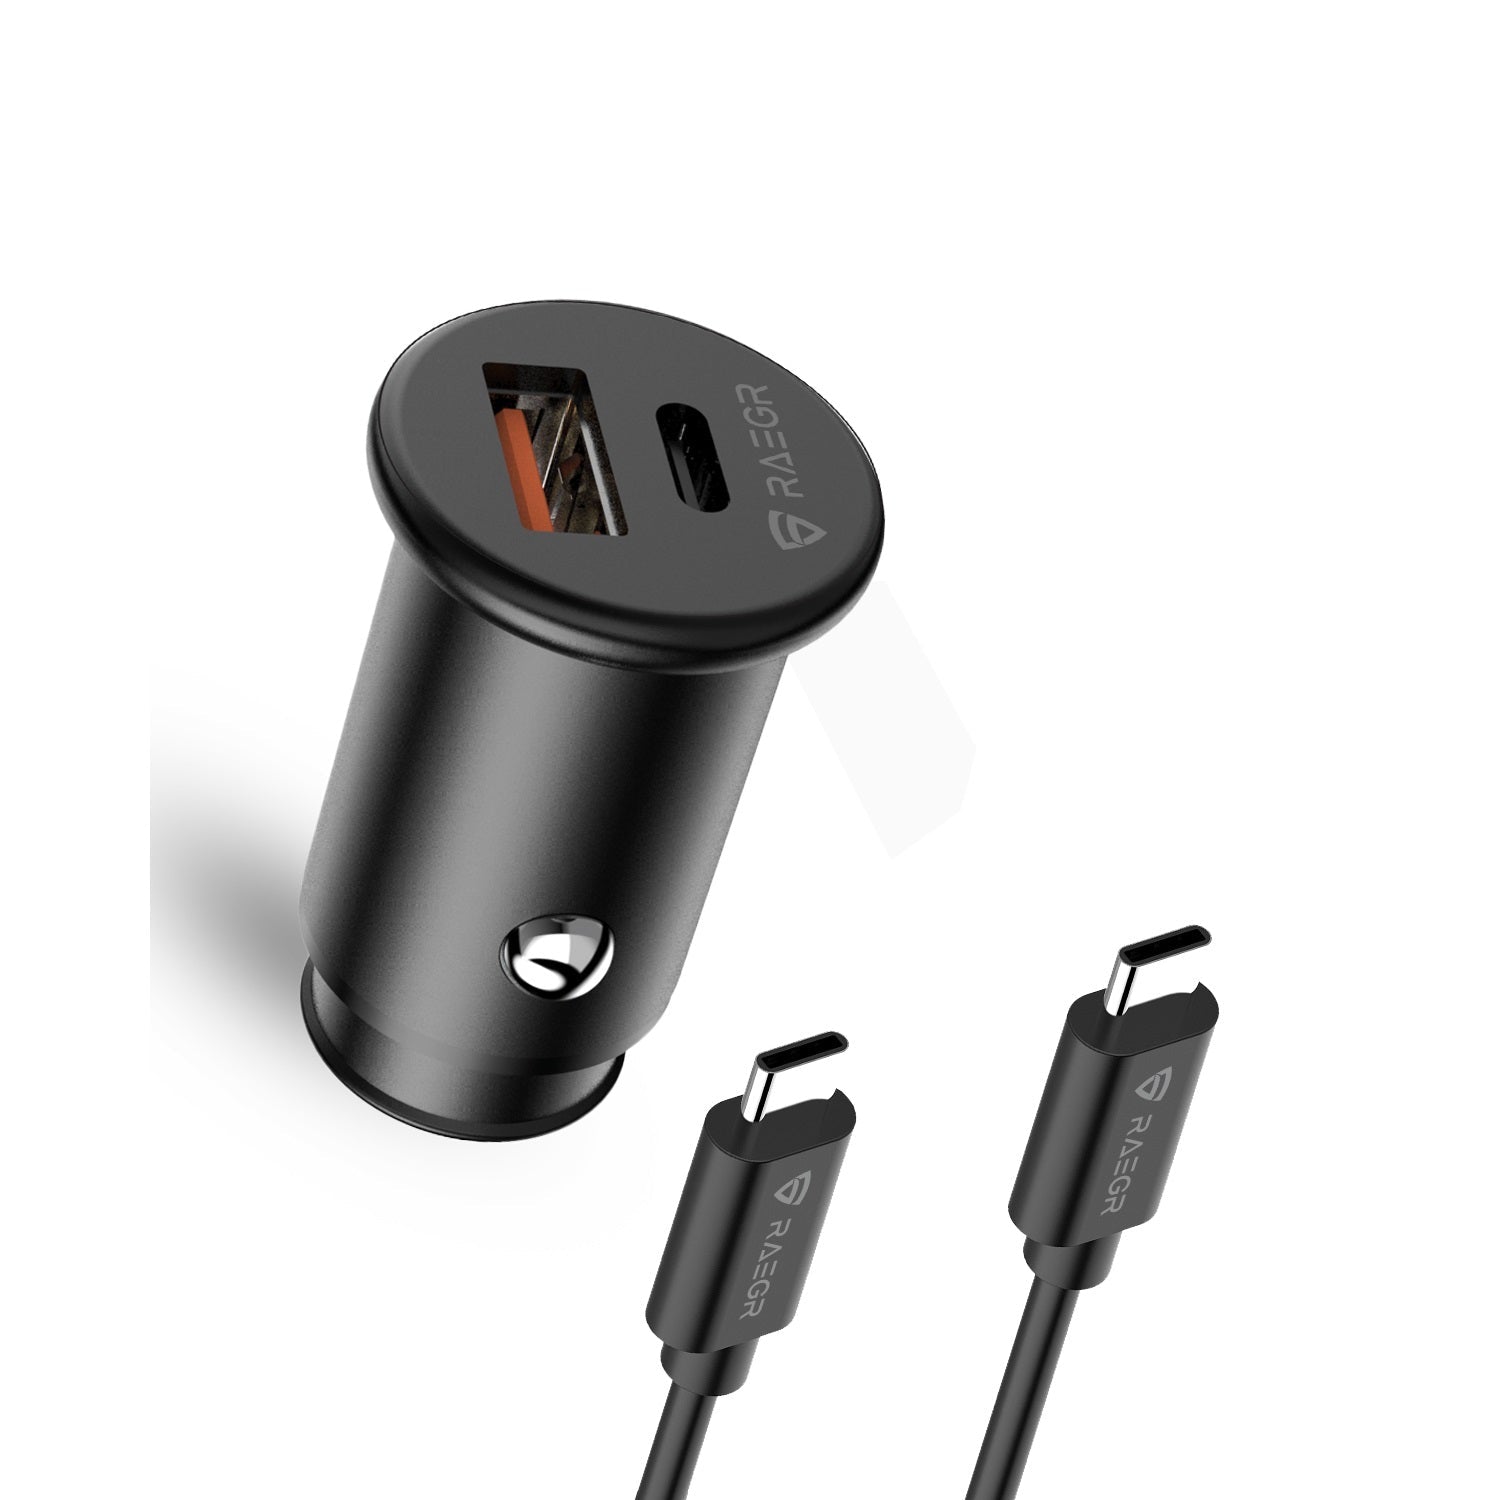 RAEGR RapidLink 400 USB+C Type Car Charger with 20W PD & 18W QC 3.0 Dual Port 3.0 Dual Port Fast Car Adapter